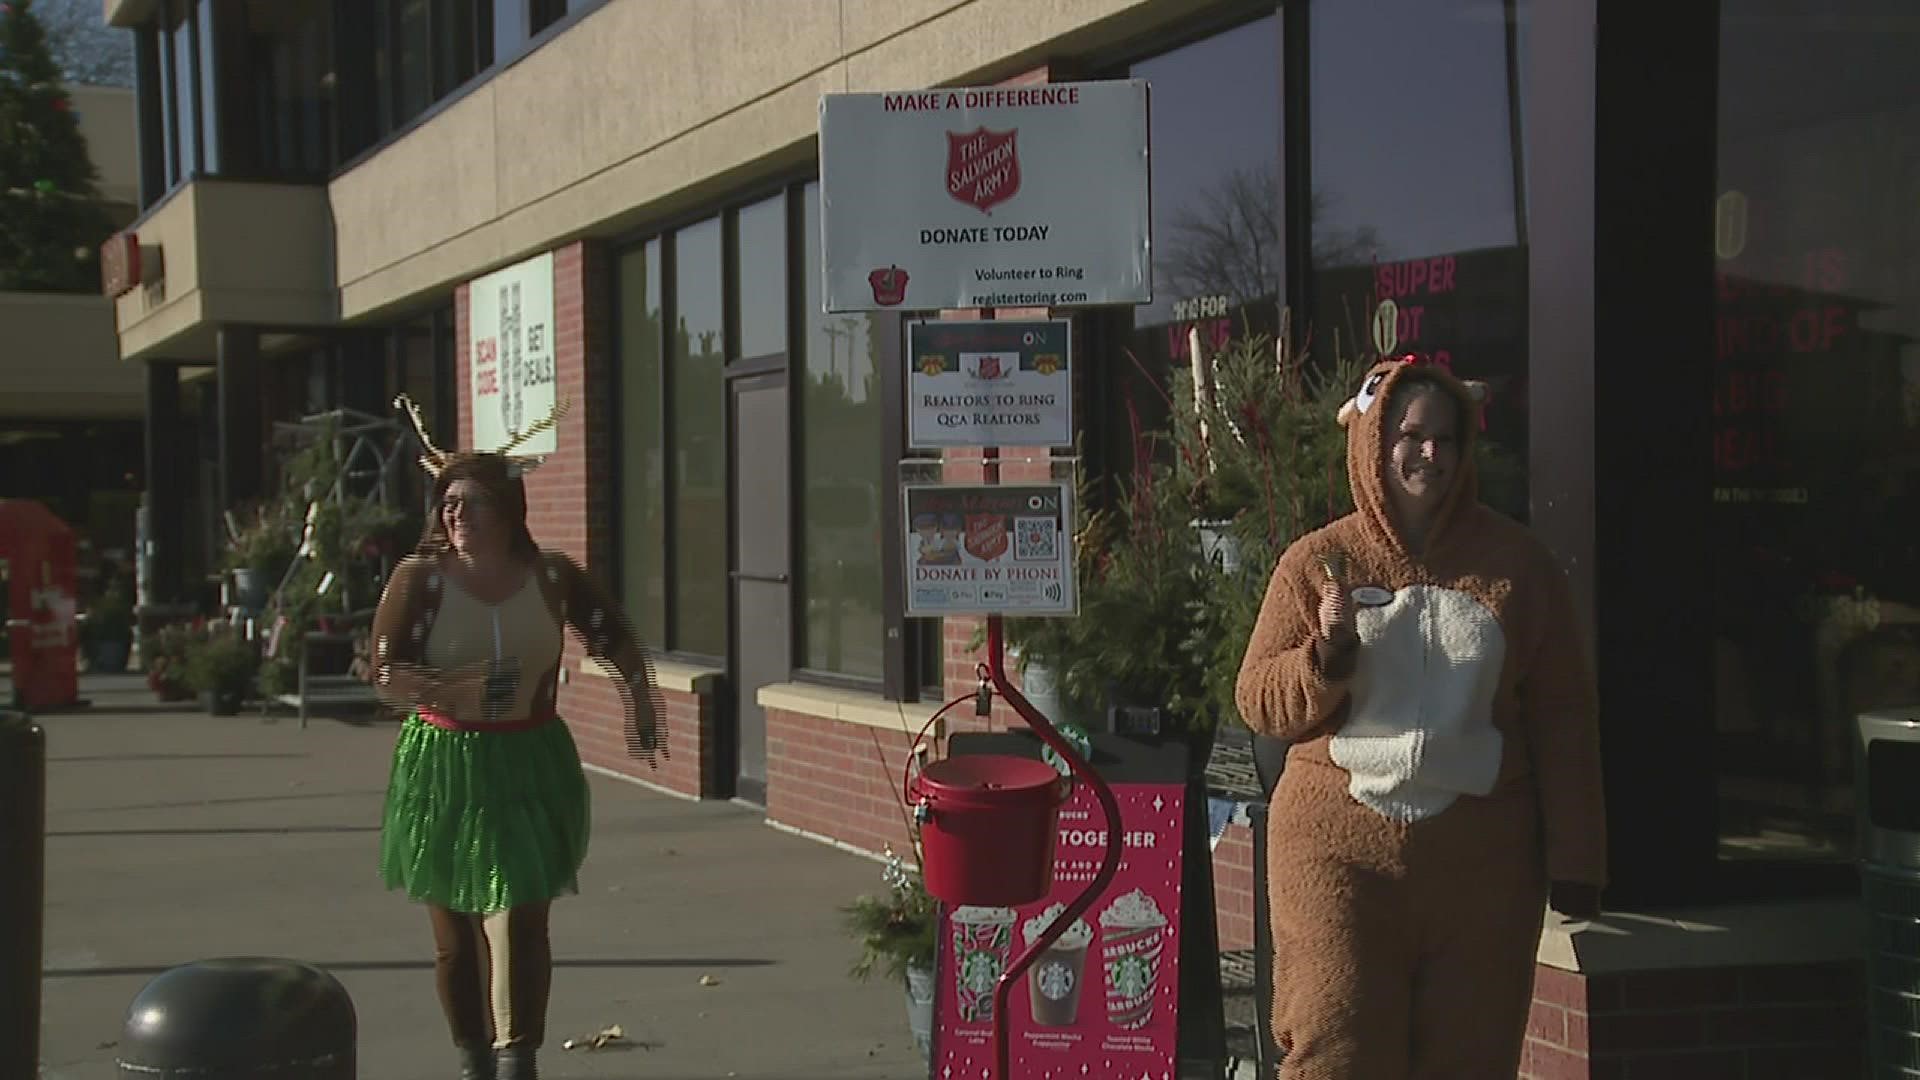 These volunteers went the extra mile in their efforts to help the short-handed Salvation Army this holiday season.